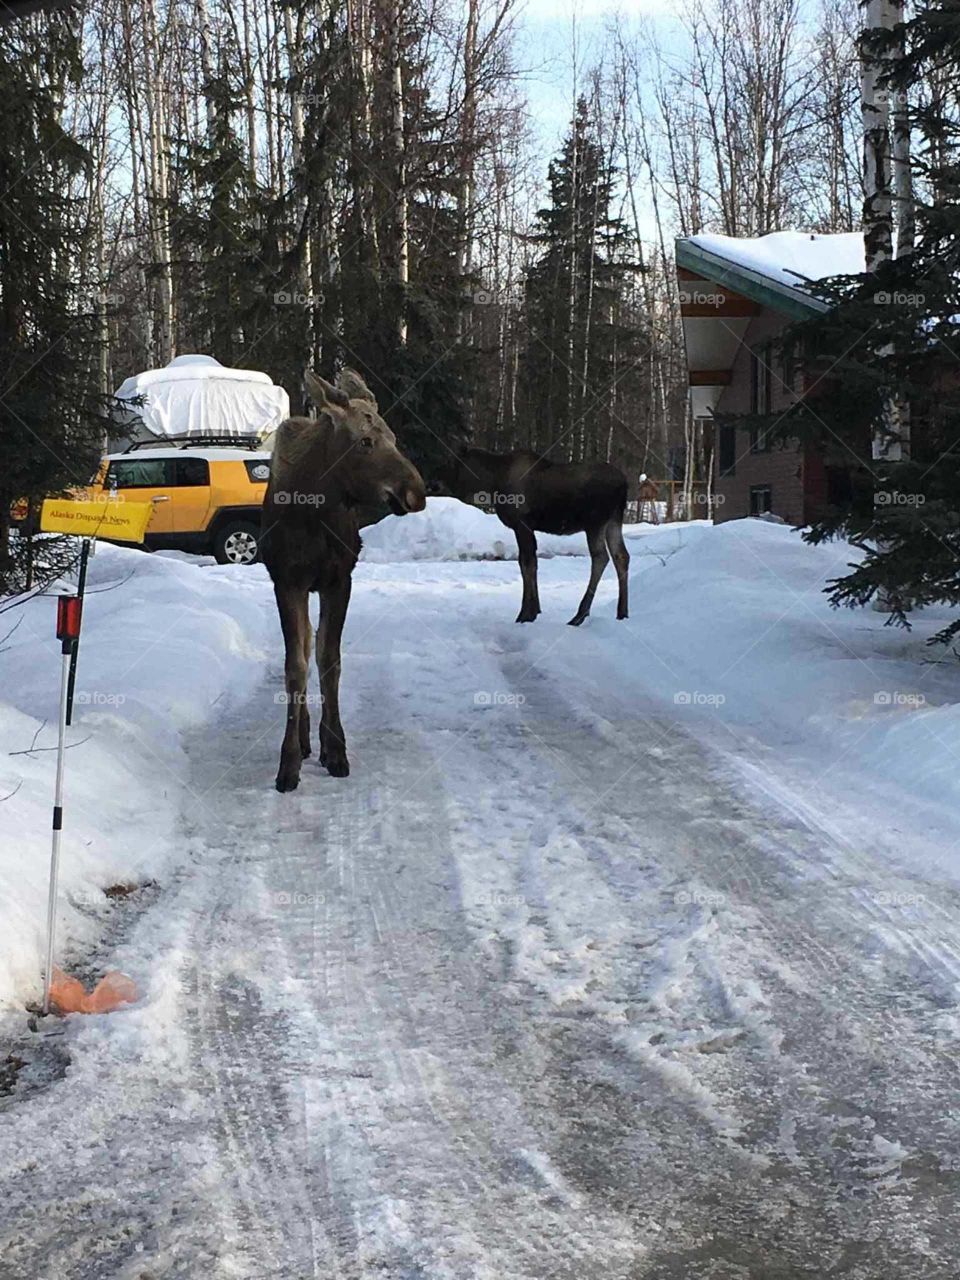 two moose caught sneaking around my friends yard, tall, cold, furry, bull, scary.